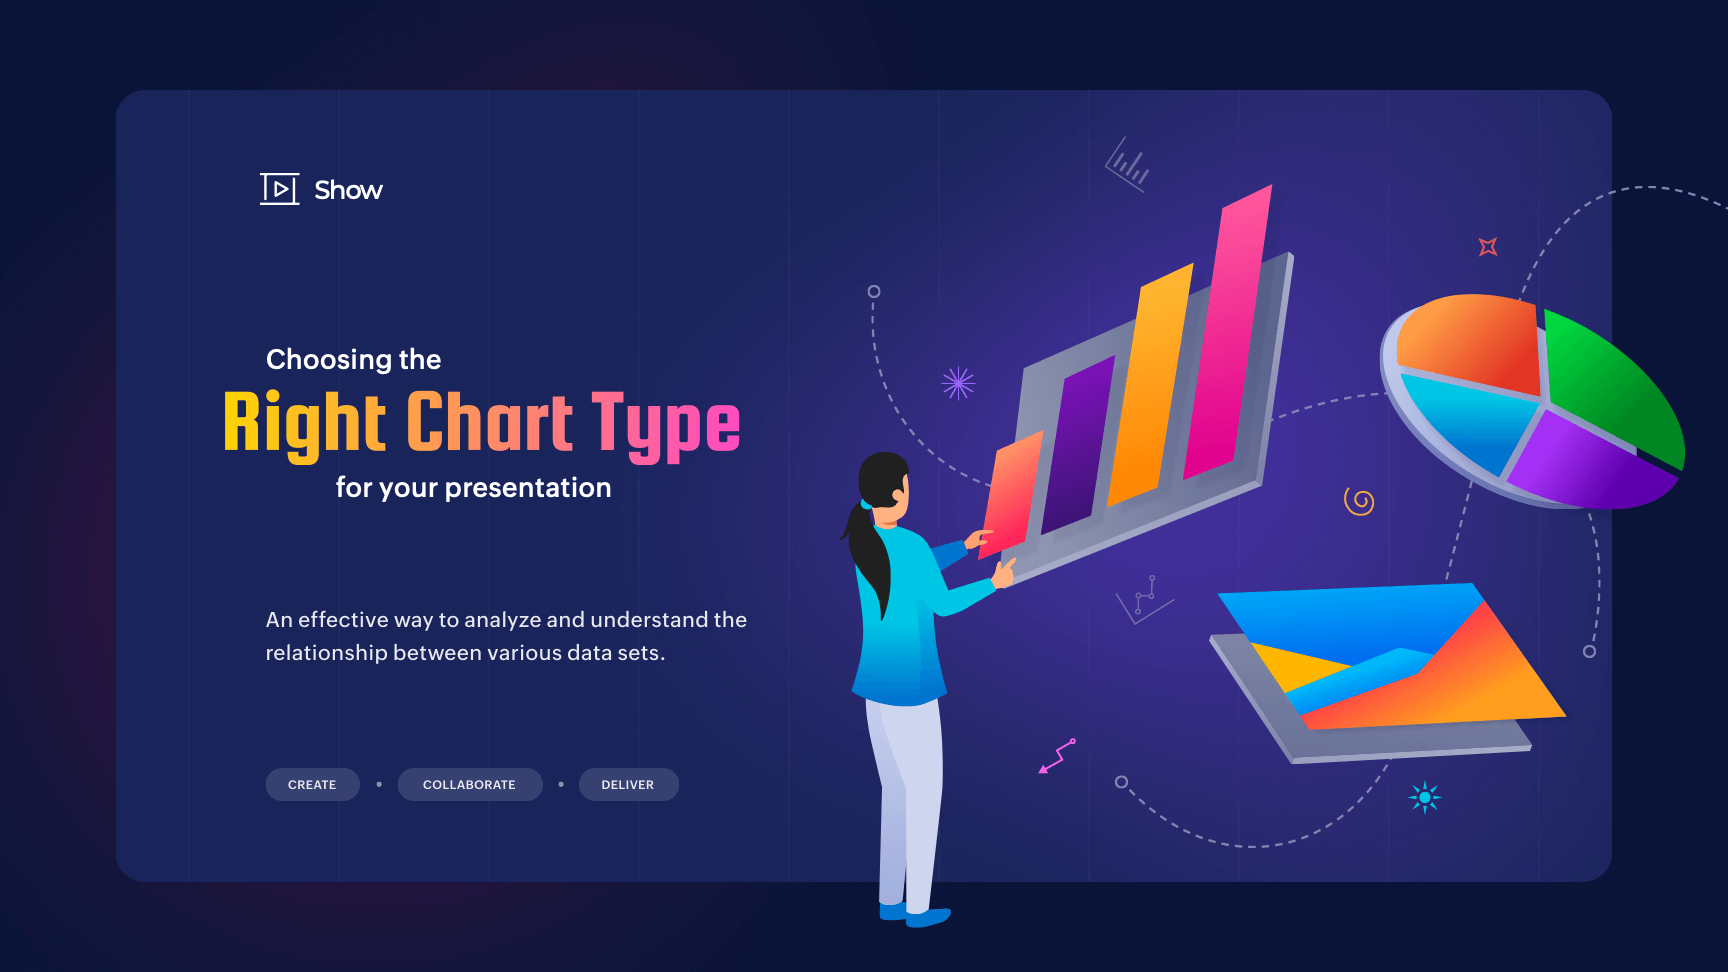 Choosing the right chart type for your presentation